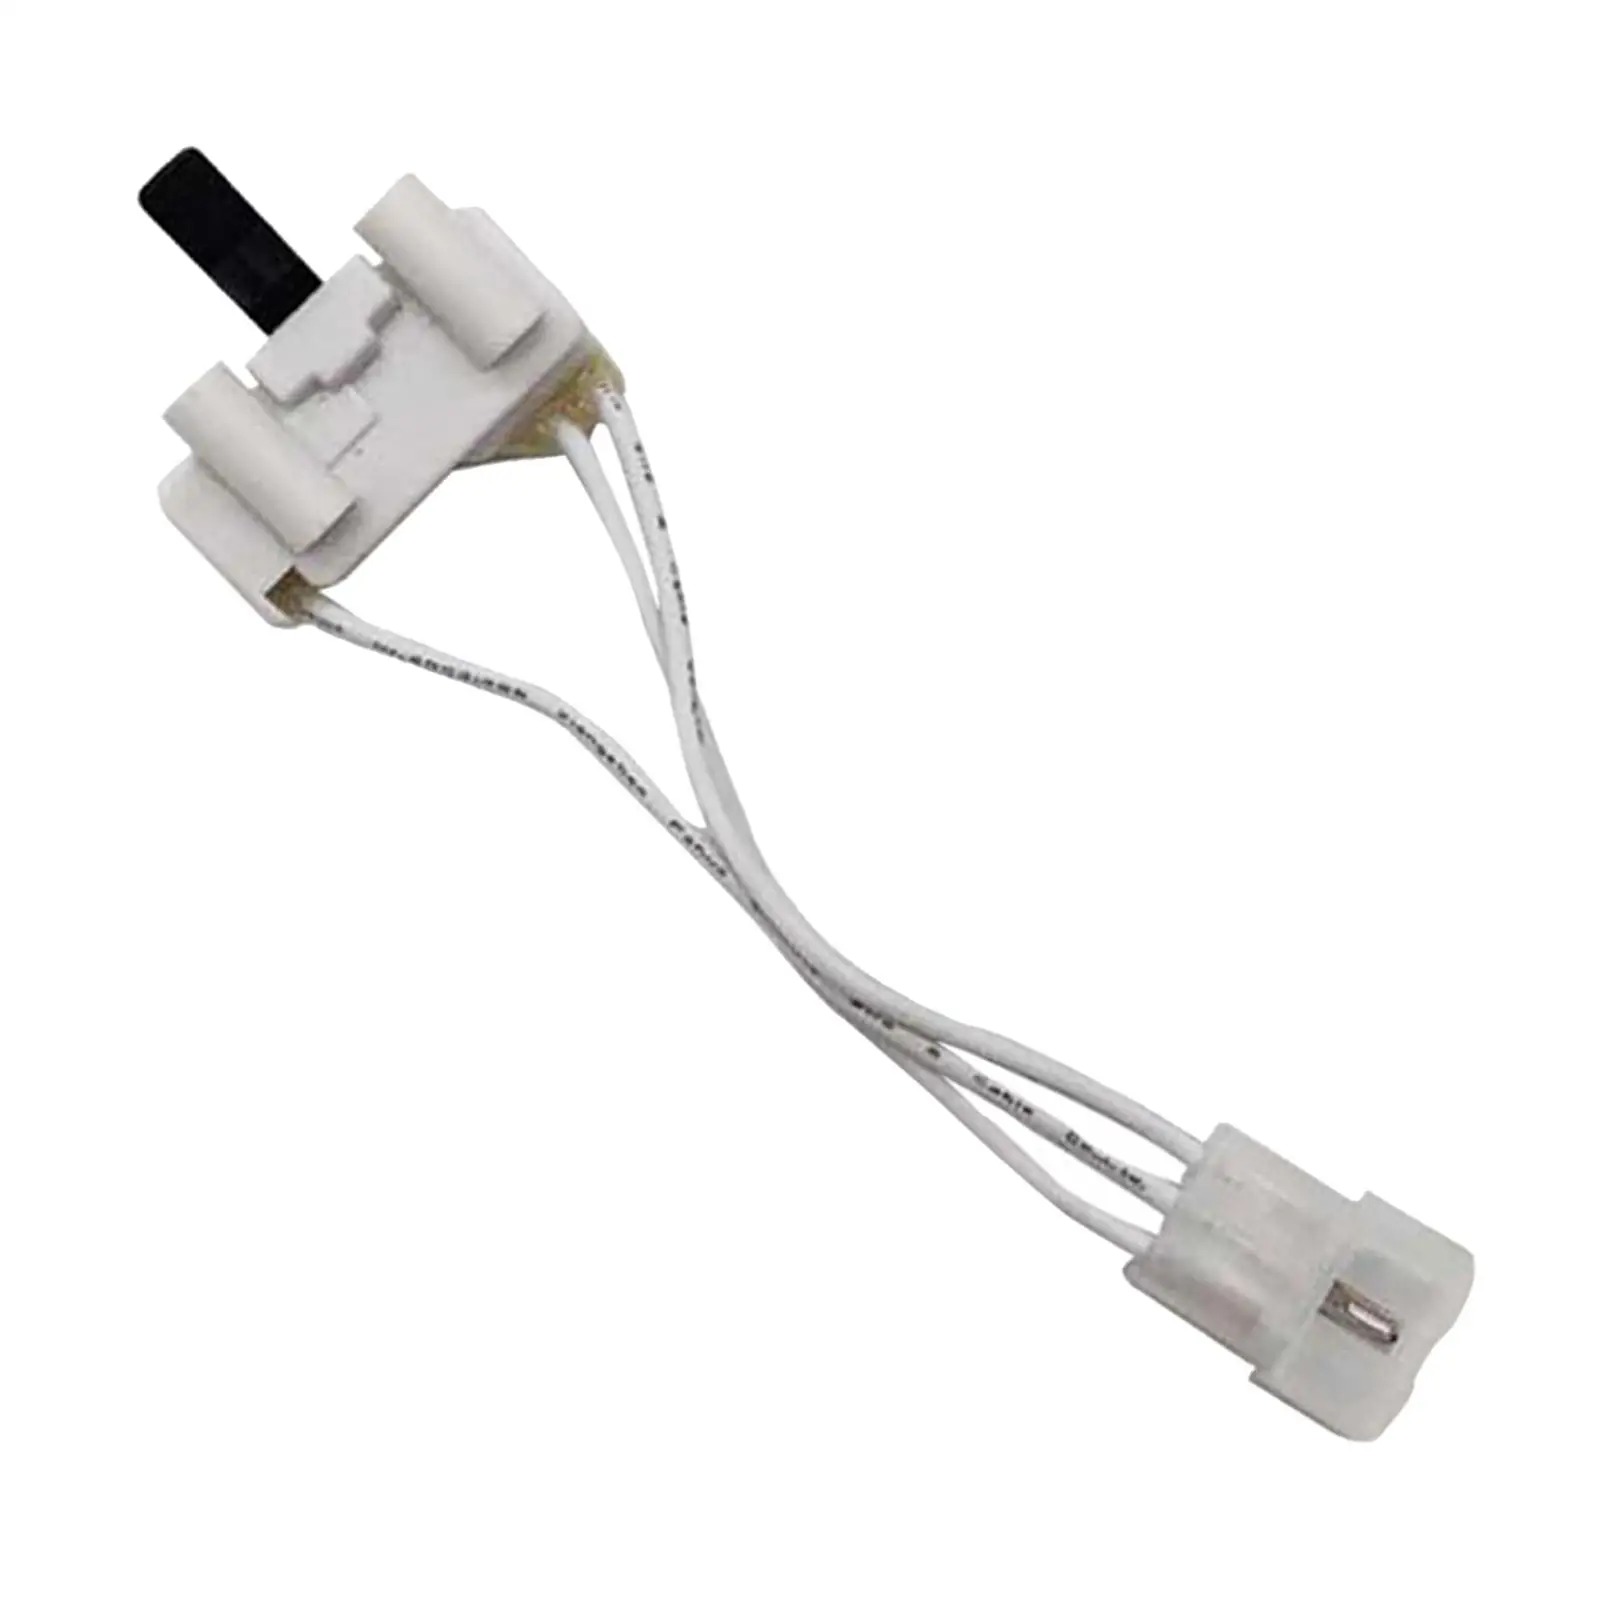 Washing Machine Switch Accessory Portable Durable Replaceable Reusable Accs Washer Switch Parts for 3406107 Washing Machine